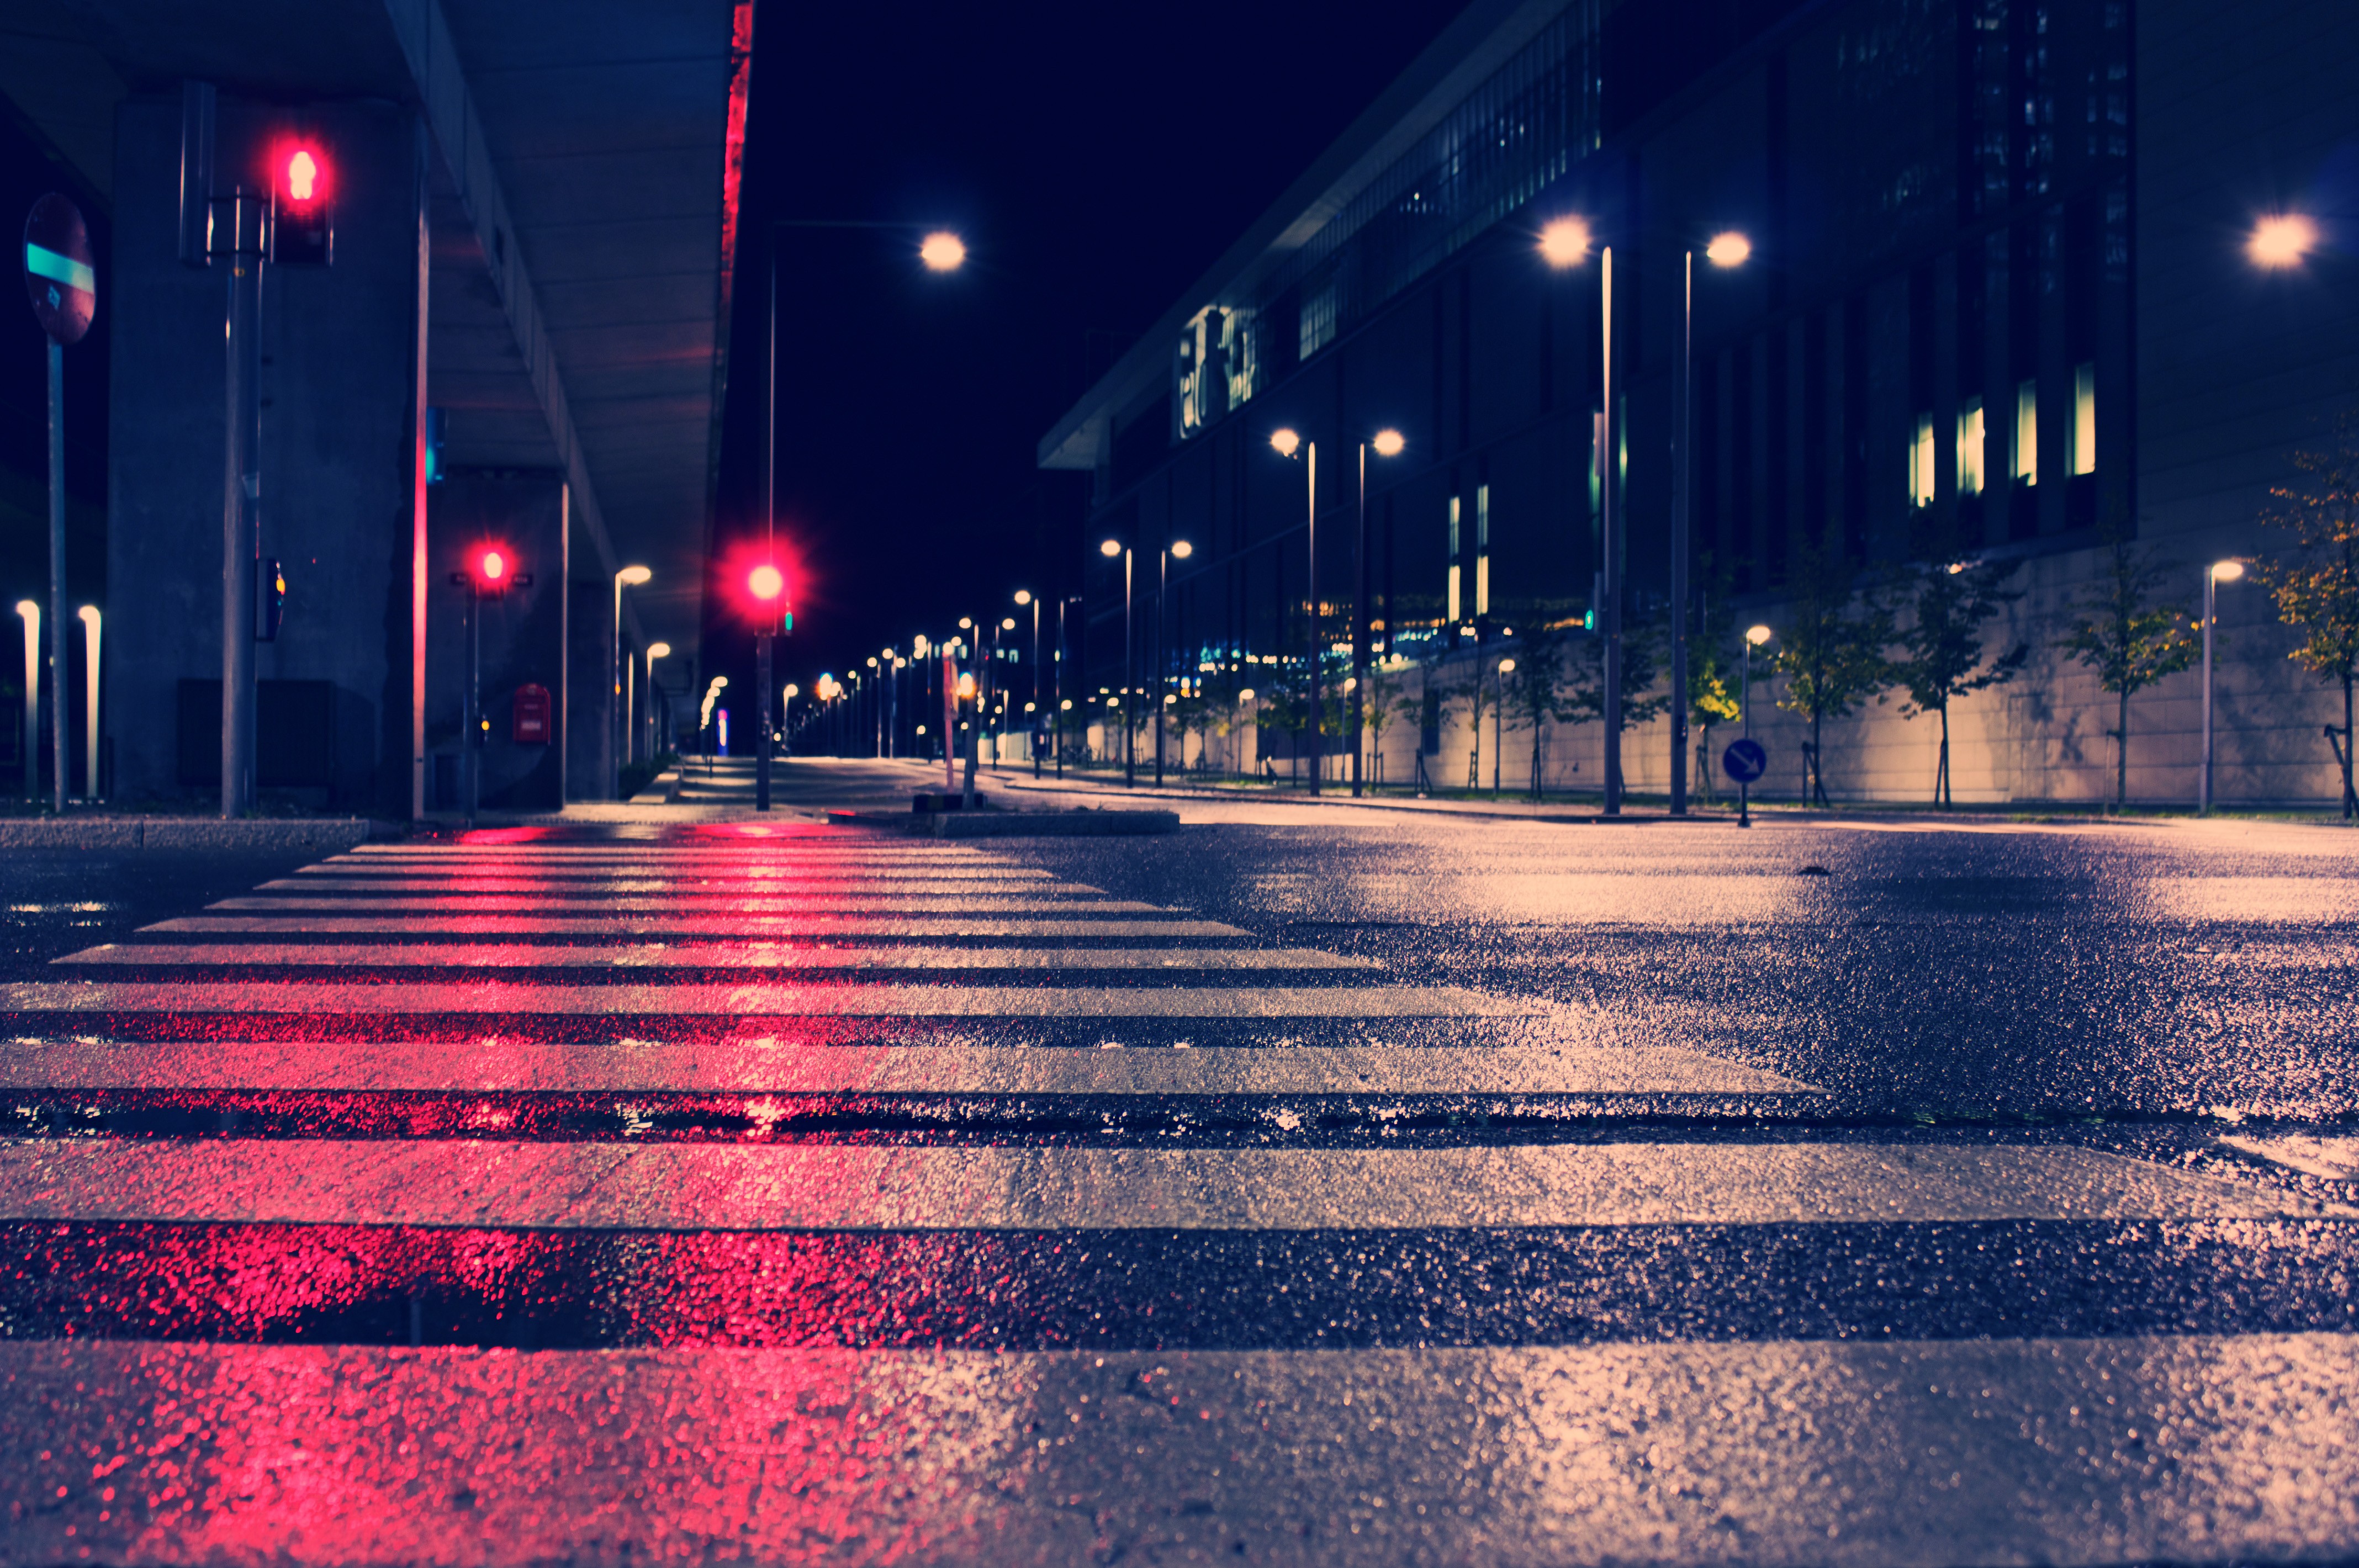 Night City Lights Street 4k Hd Photography 4k Wallpapers Images Backgrounds Photos And Pictures